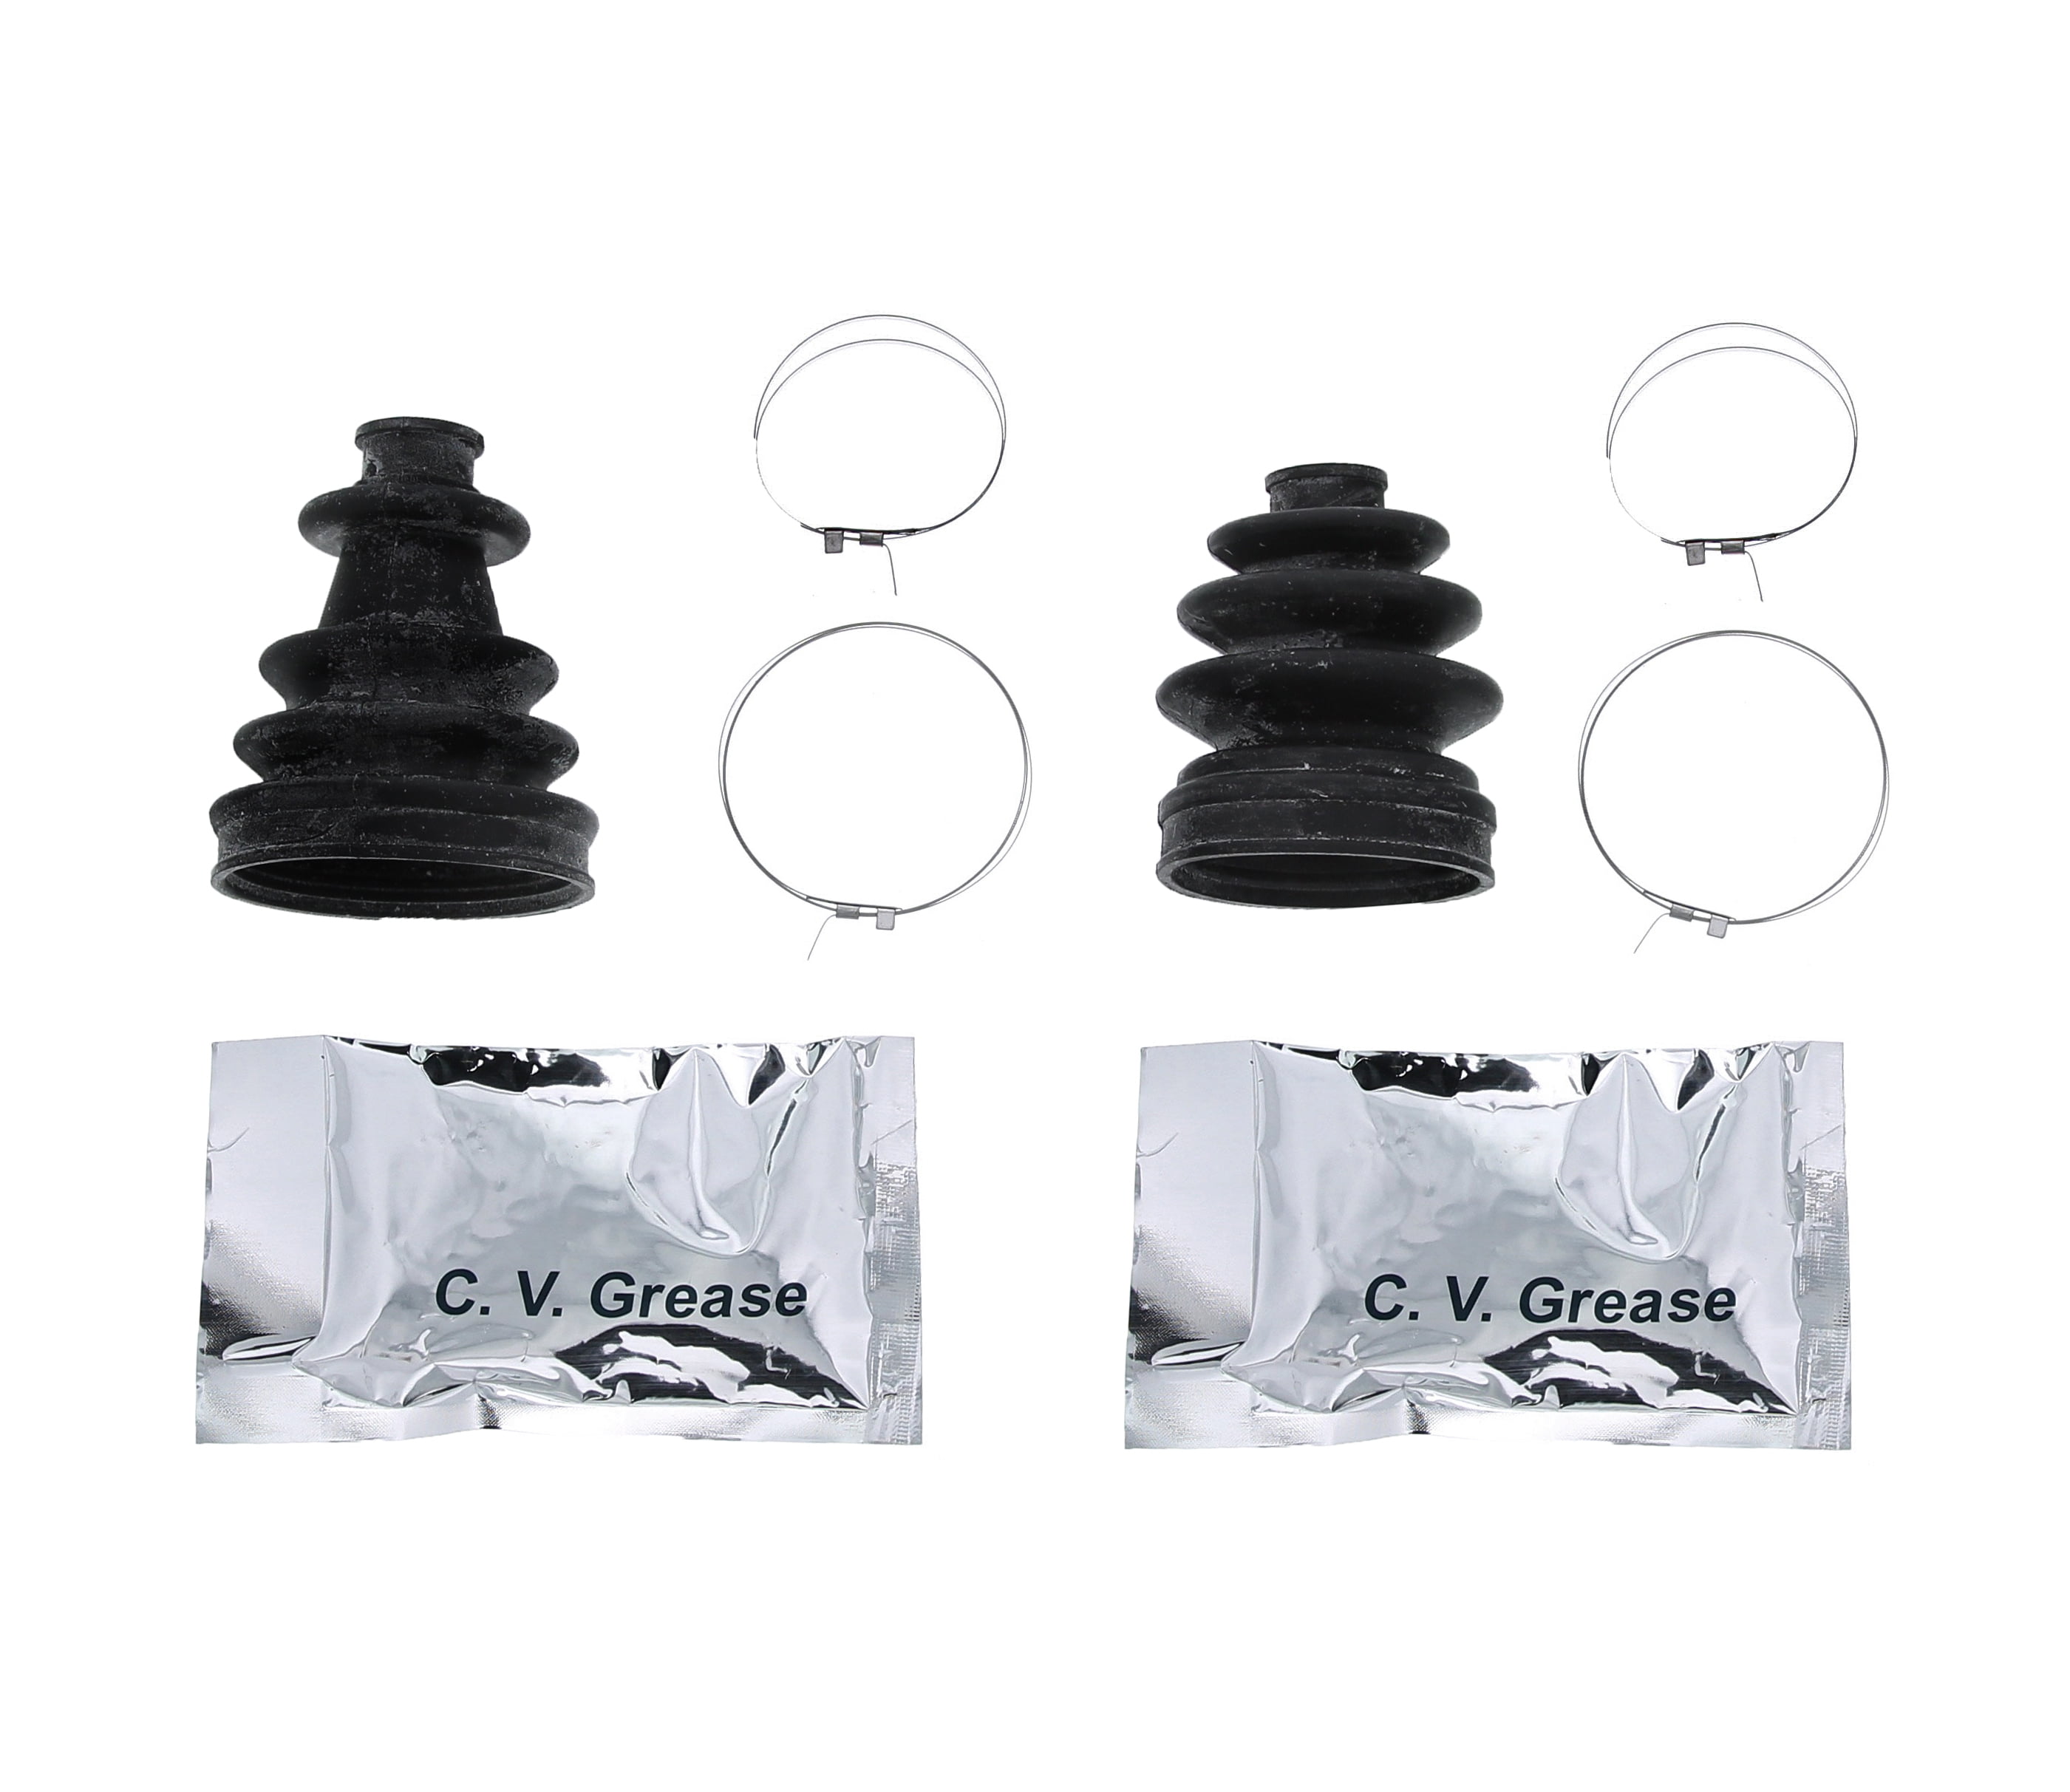 Polaris RZR 800 CV Boot Kit Rear Inner and Outer Rubber 2011-2014 